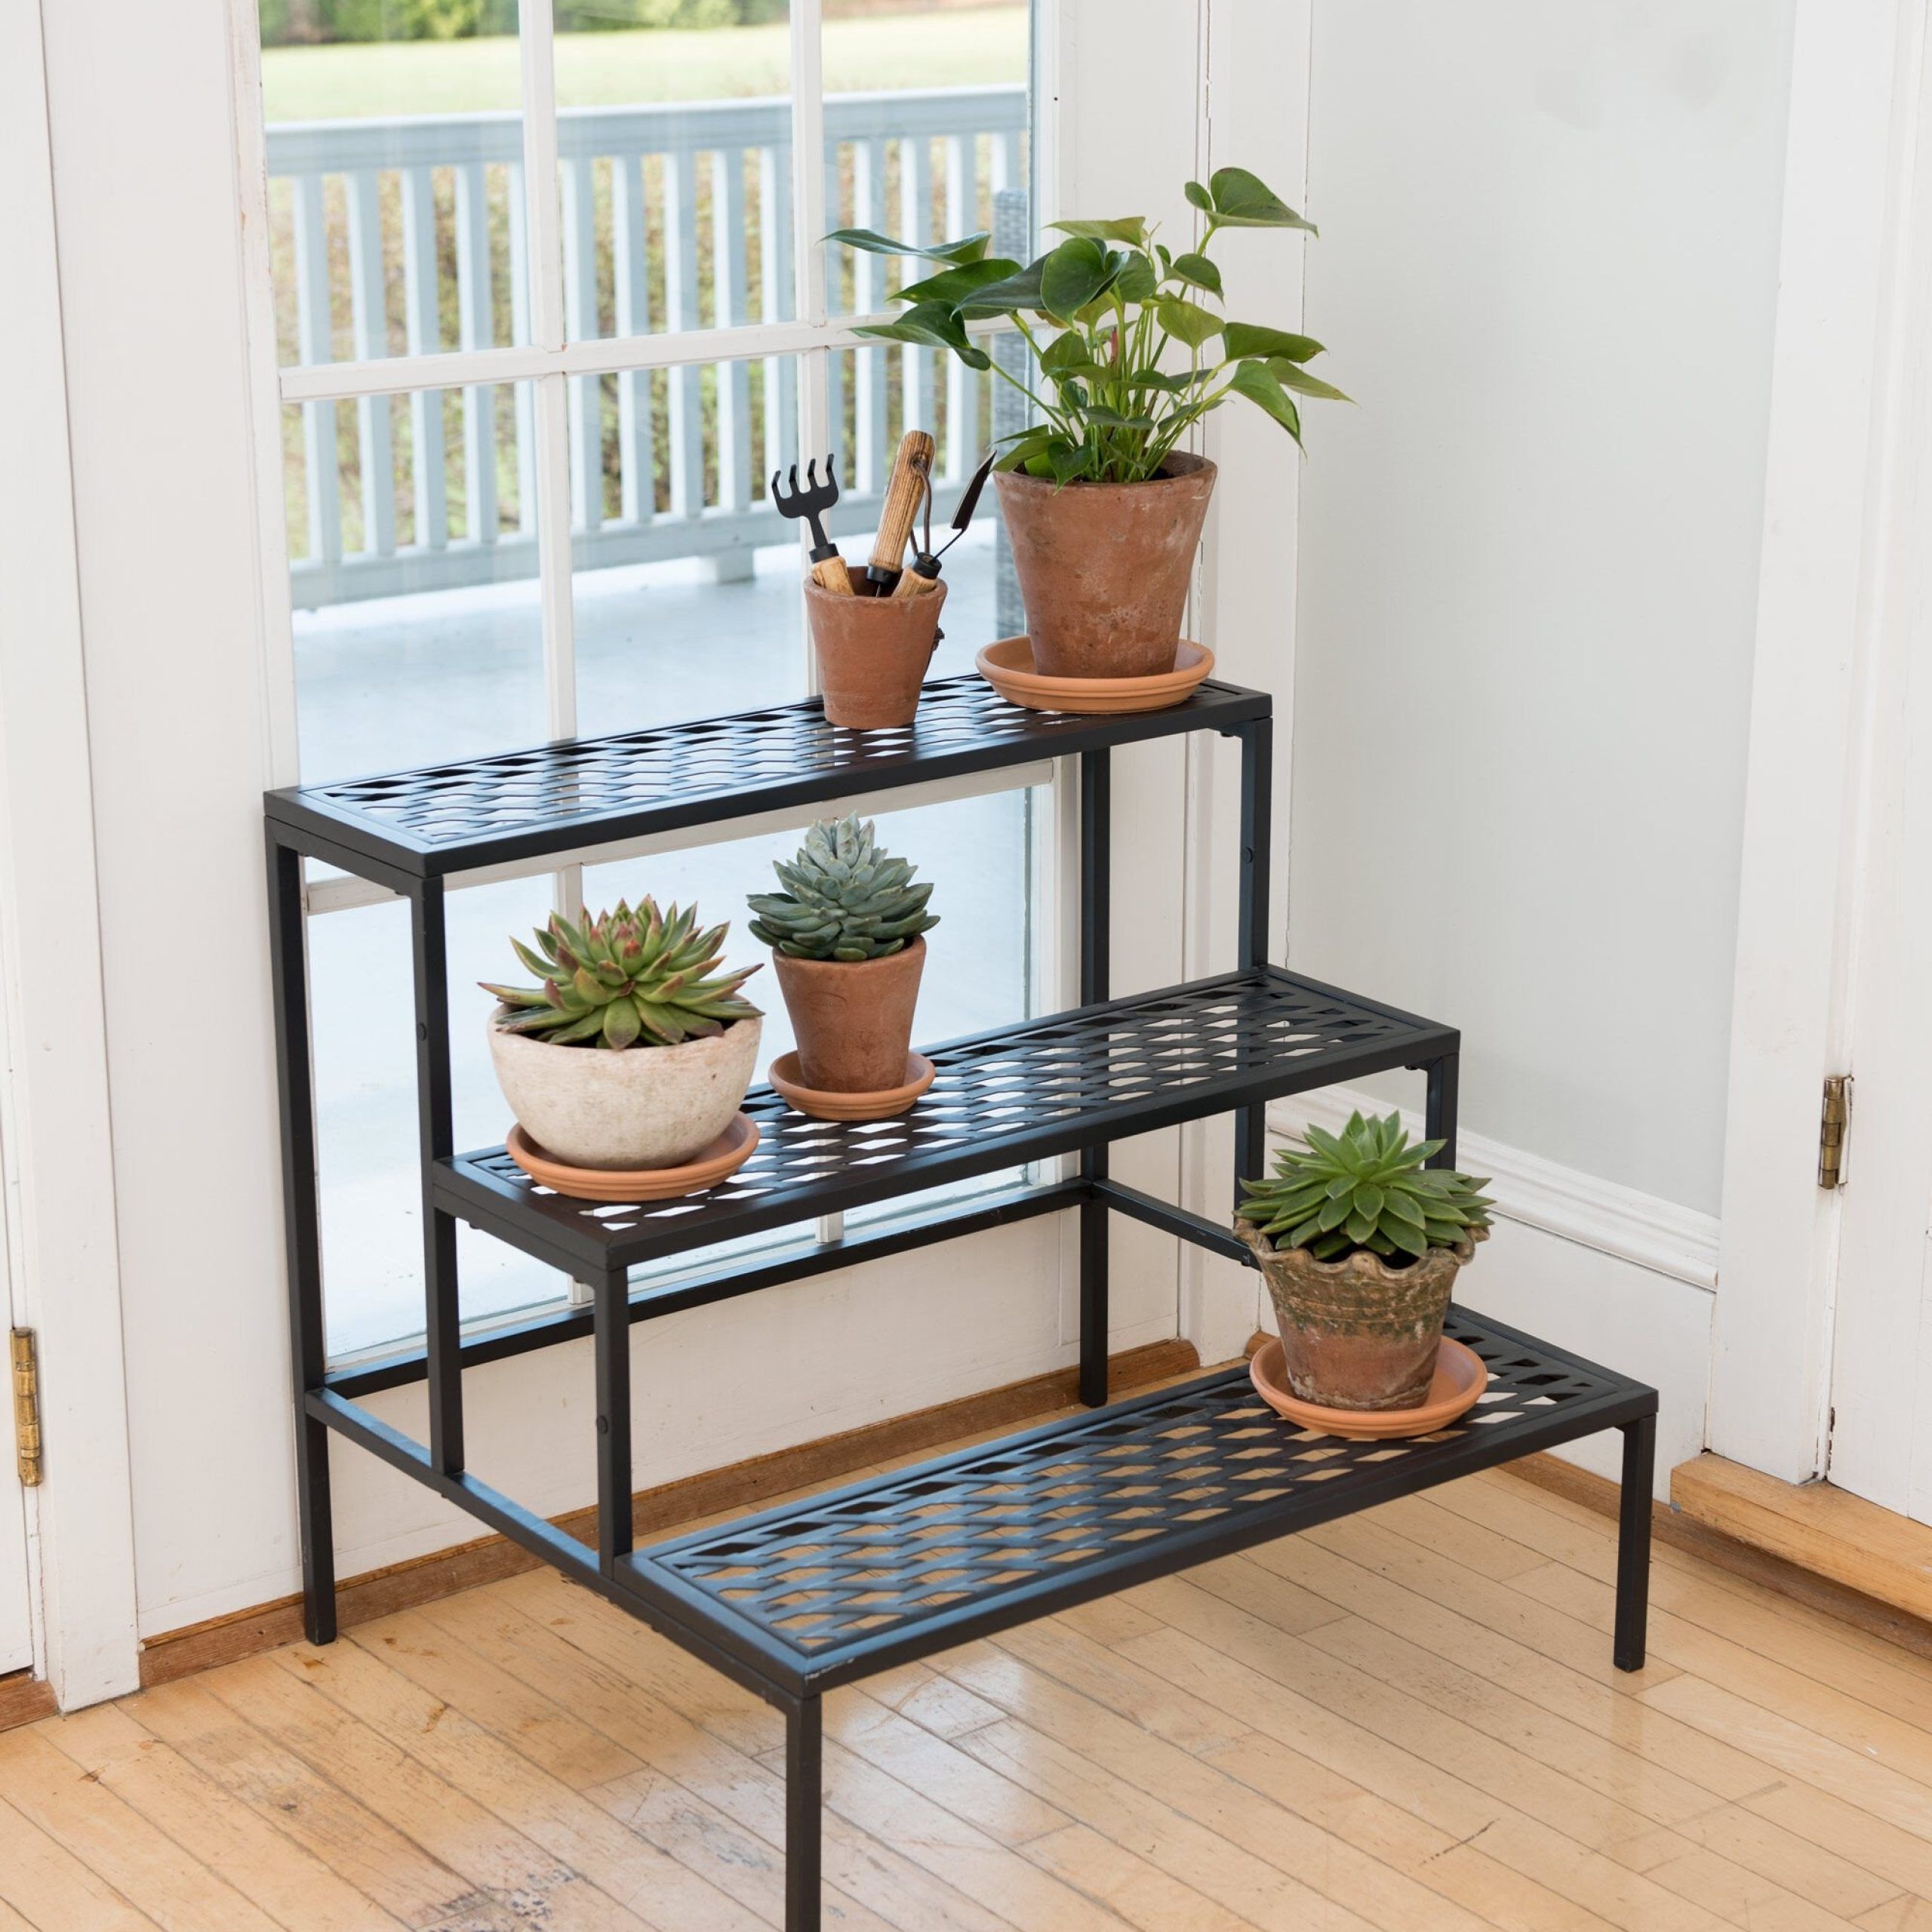 Lattice Multi Tiered Plant Stand – Black | Gardener's Supply Pertaining To Three Tier Plant Stands (View 4 of 15)